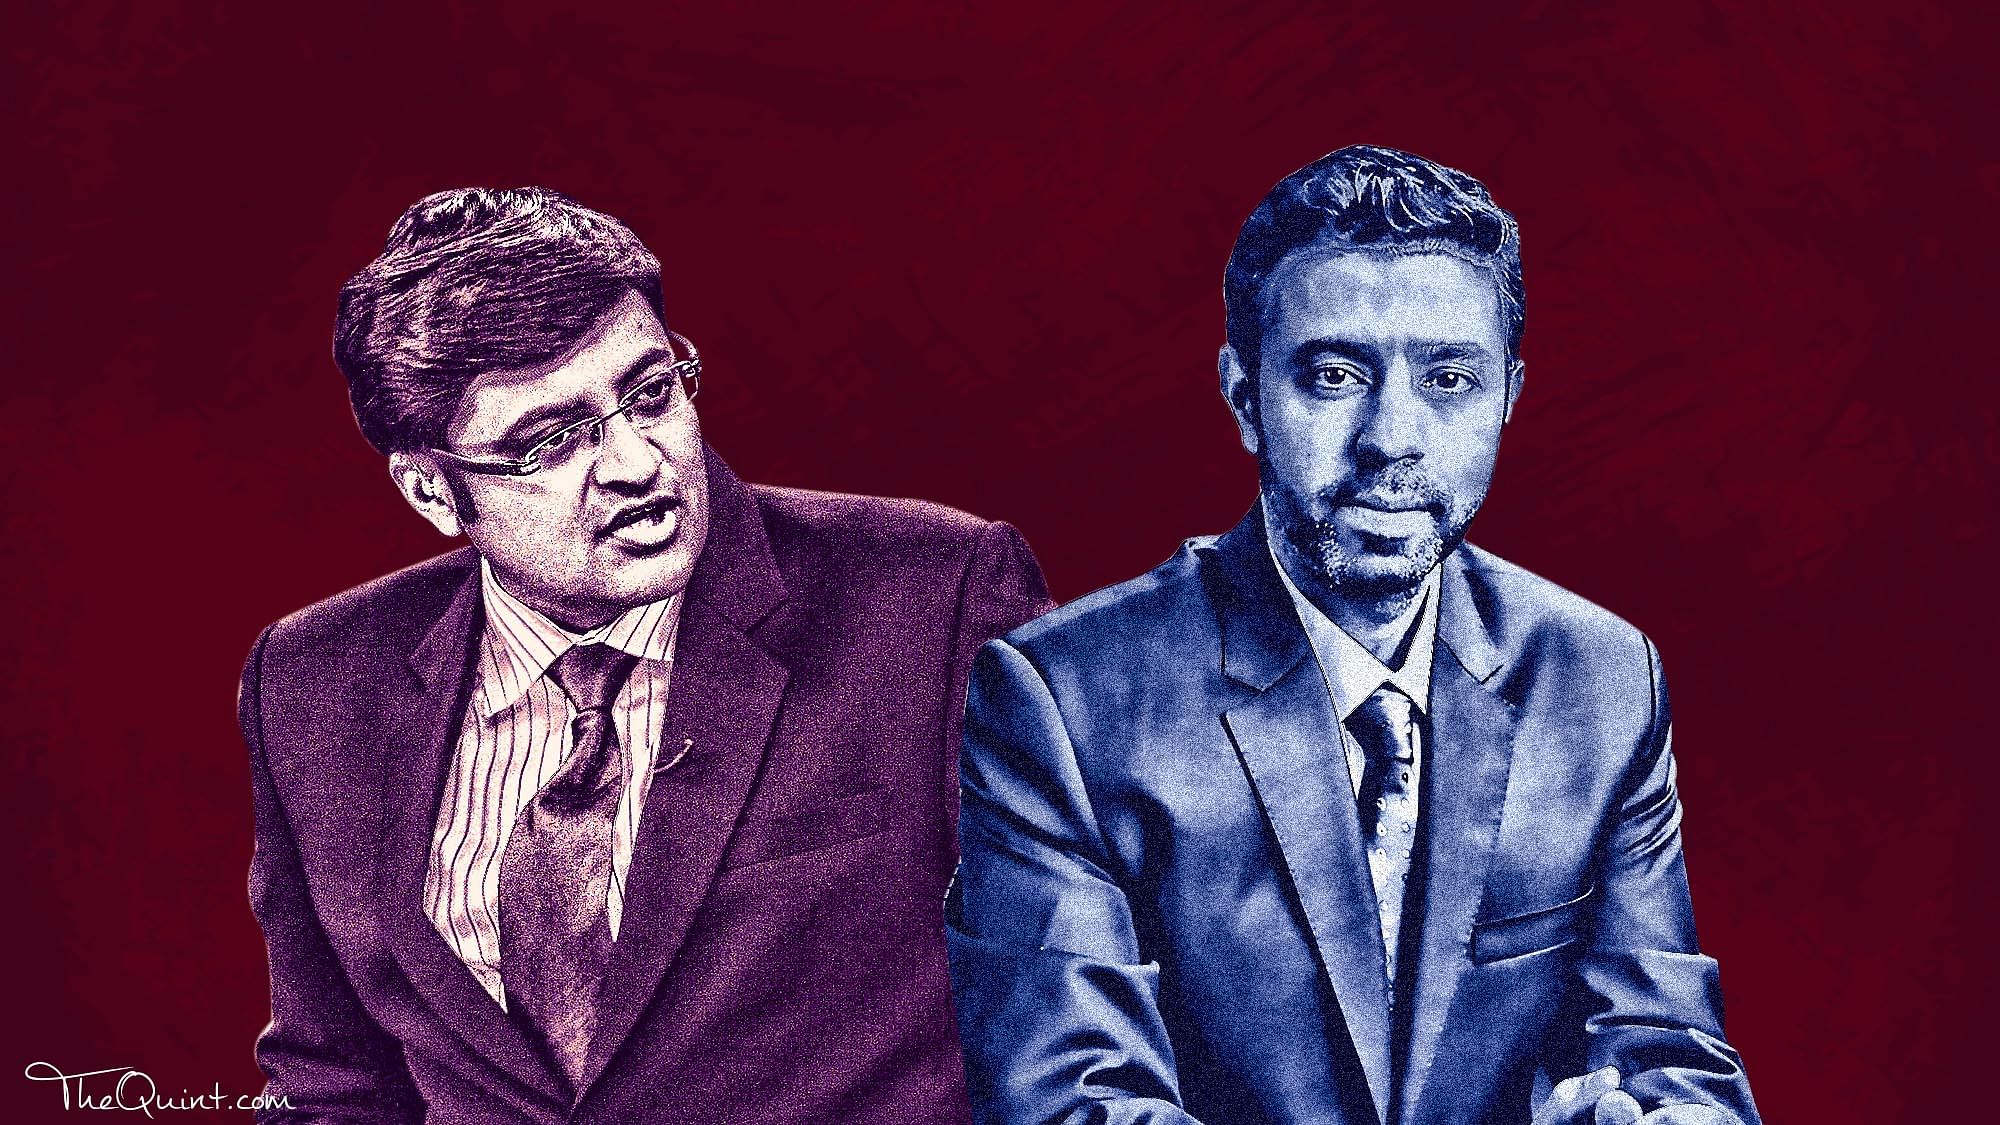 Times Now has caught up with Republic TV in the race for television ratings (Photo: Rhythum Seth/The Quint)